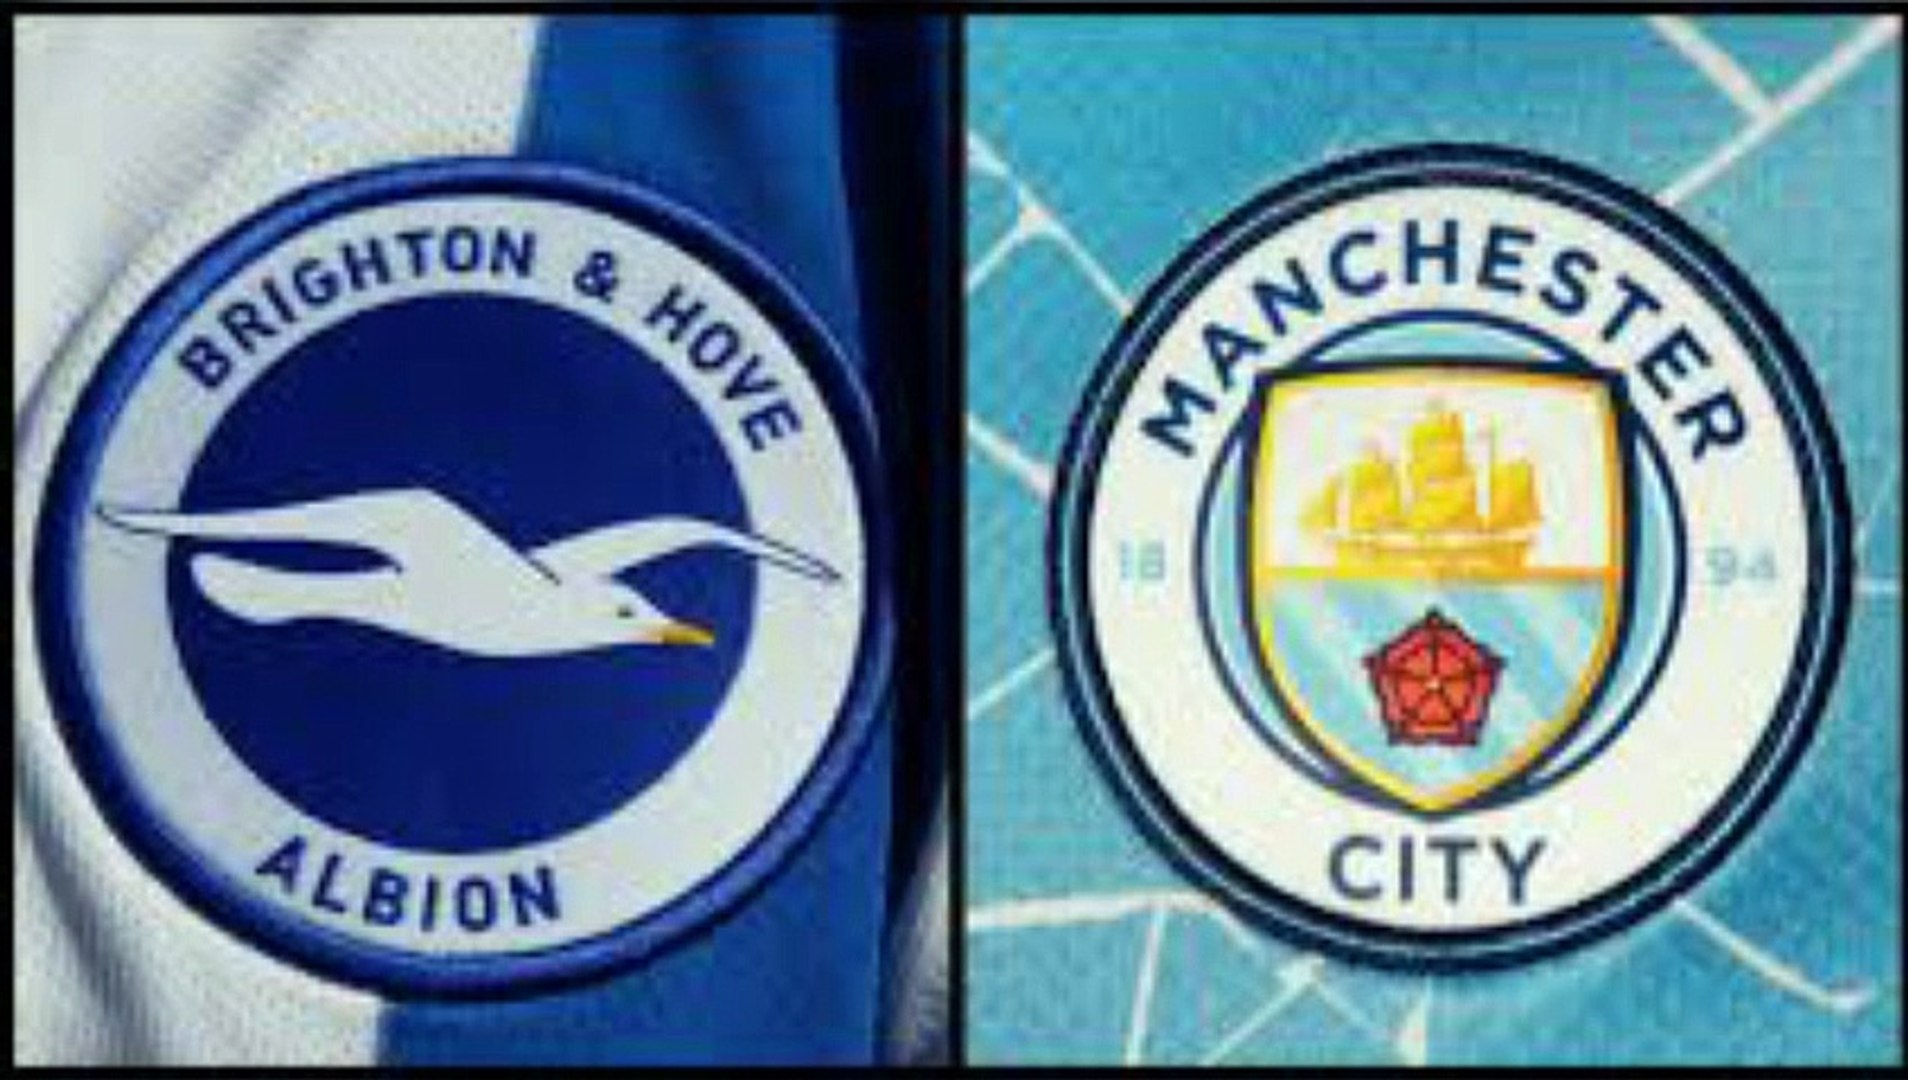 Brighton Vs Manchester City Ends In A 1-1 Draw